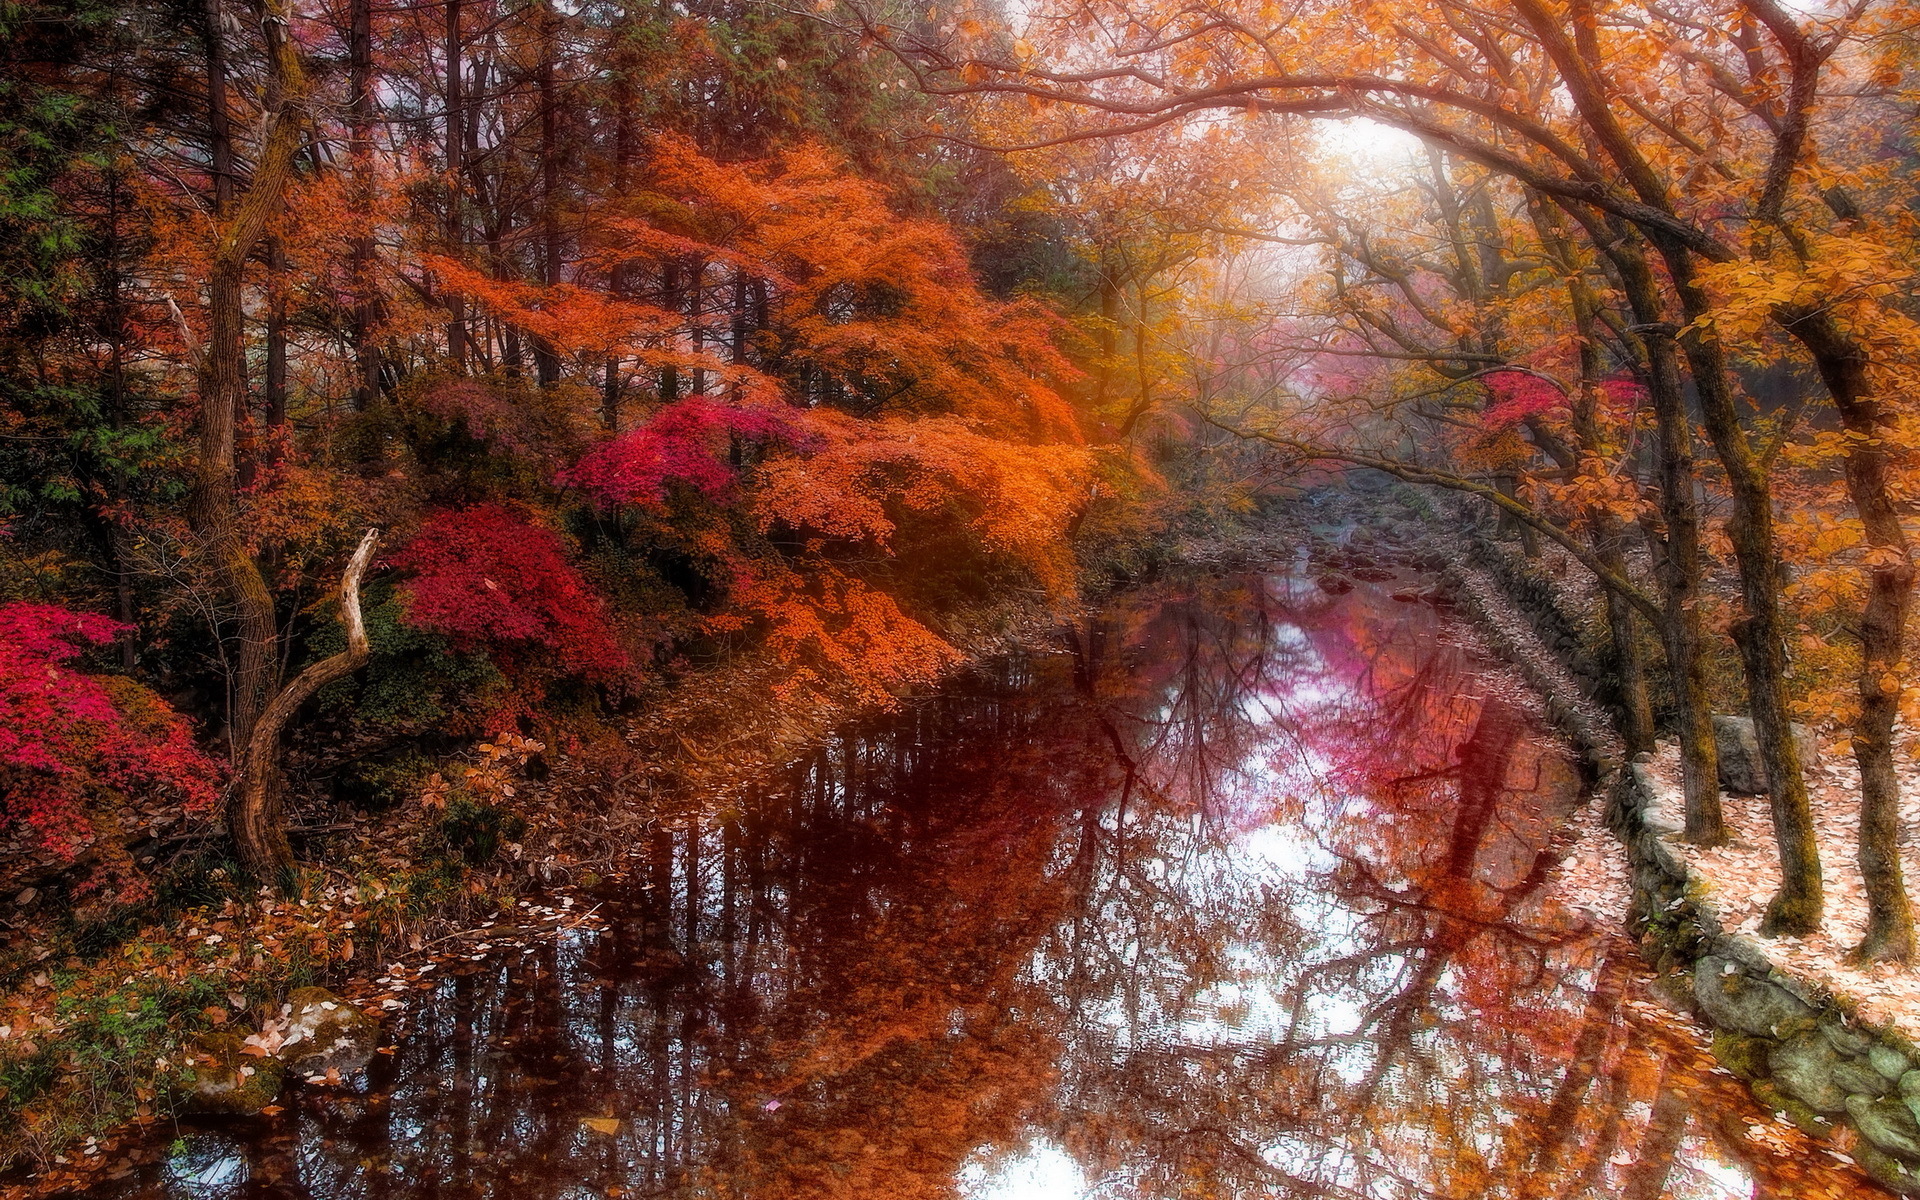 Lovely memories of the autumn HD Wallpaper. Background